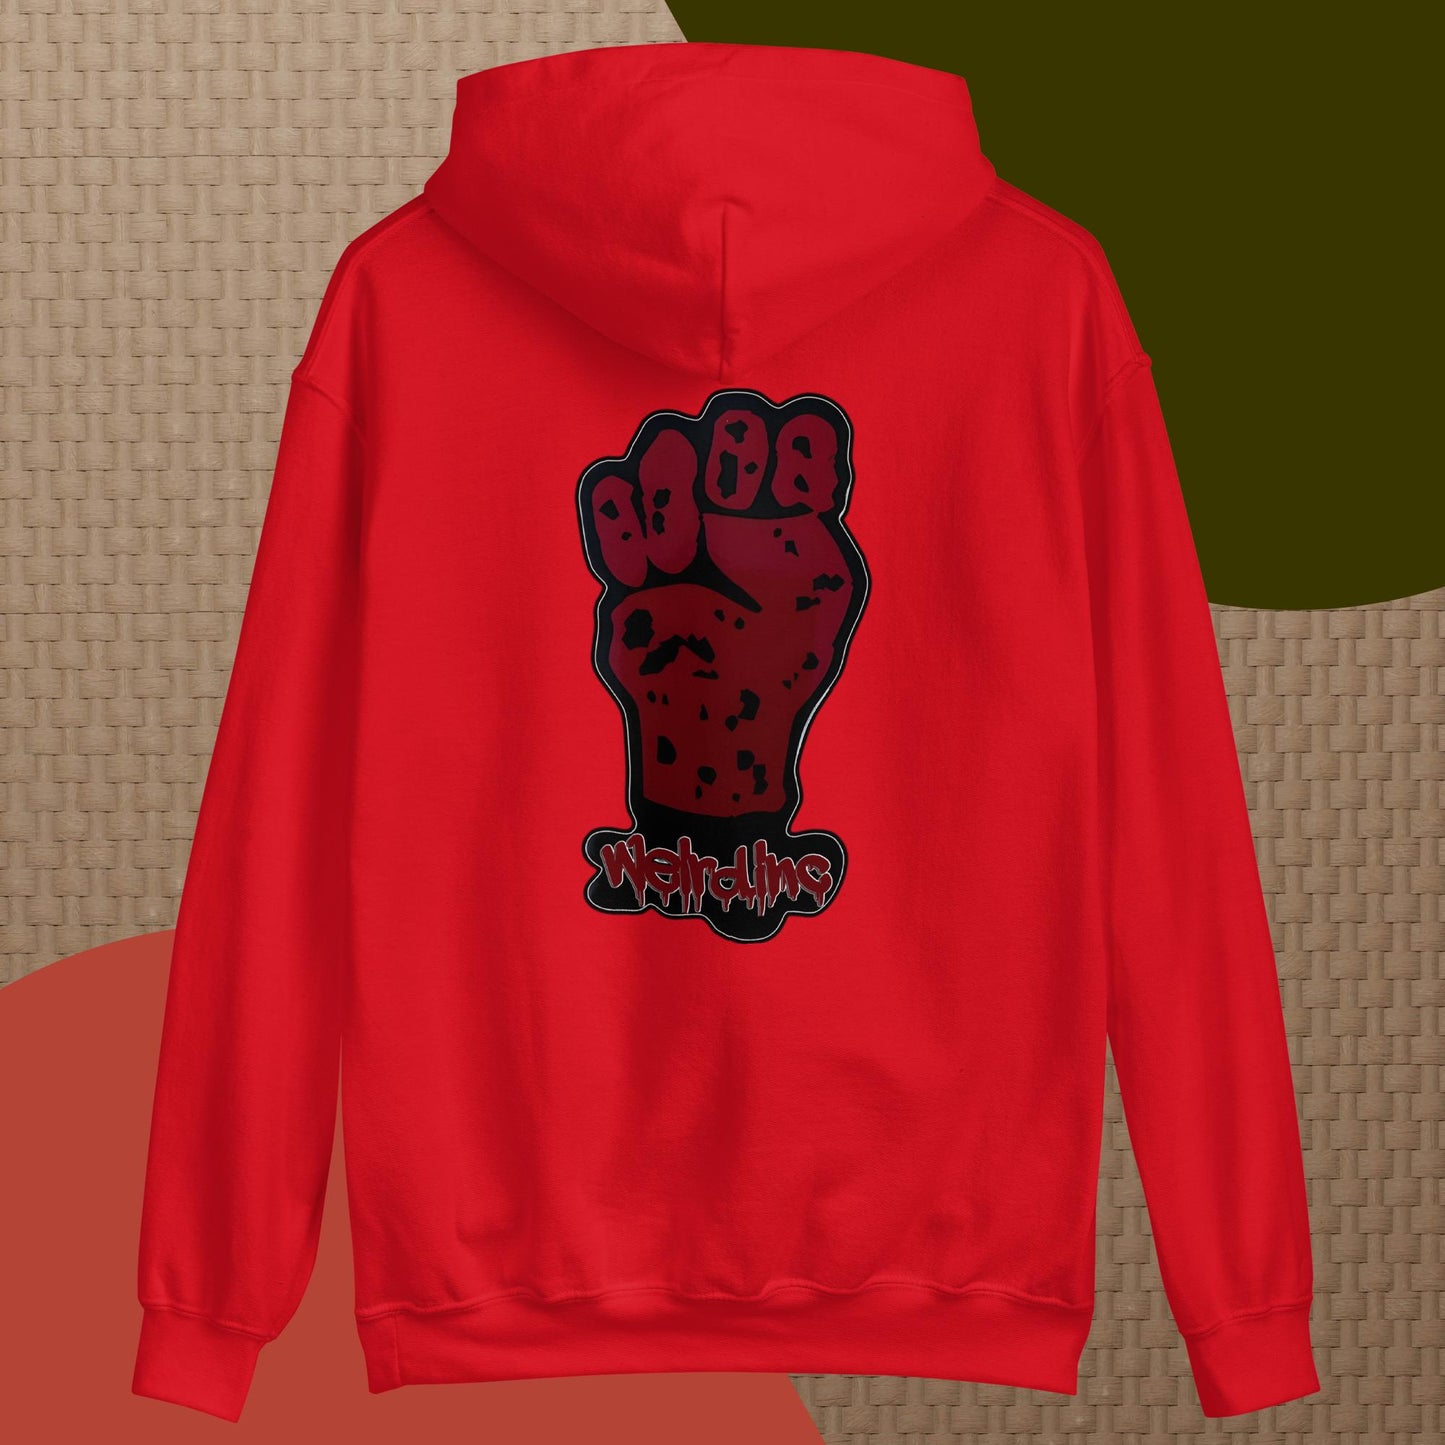 Power To The People by Weird.inc Casual Unisex Hoodie